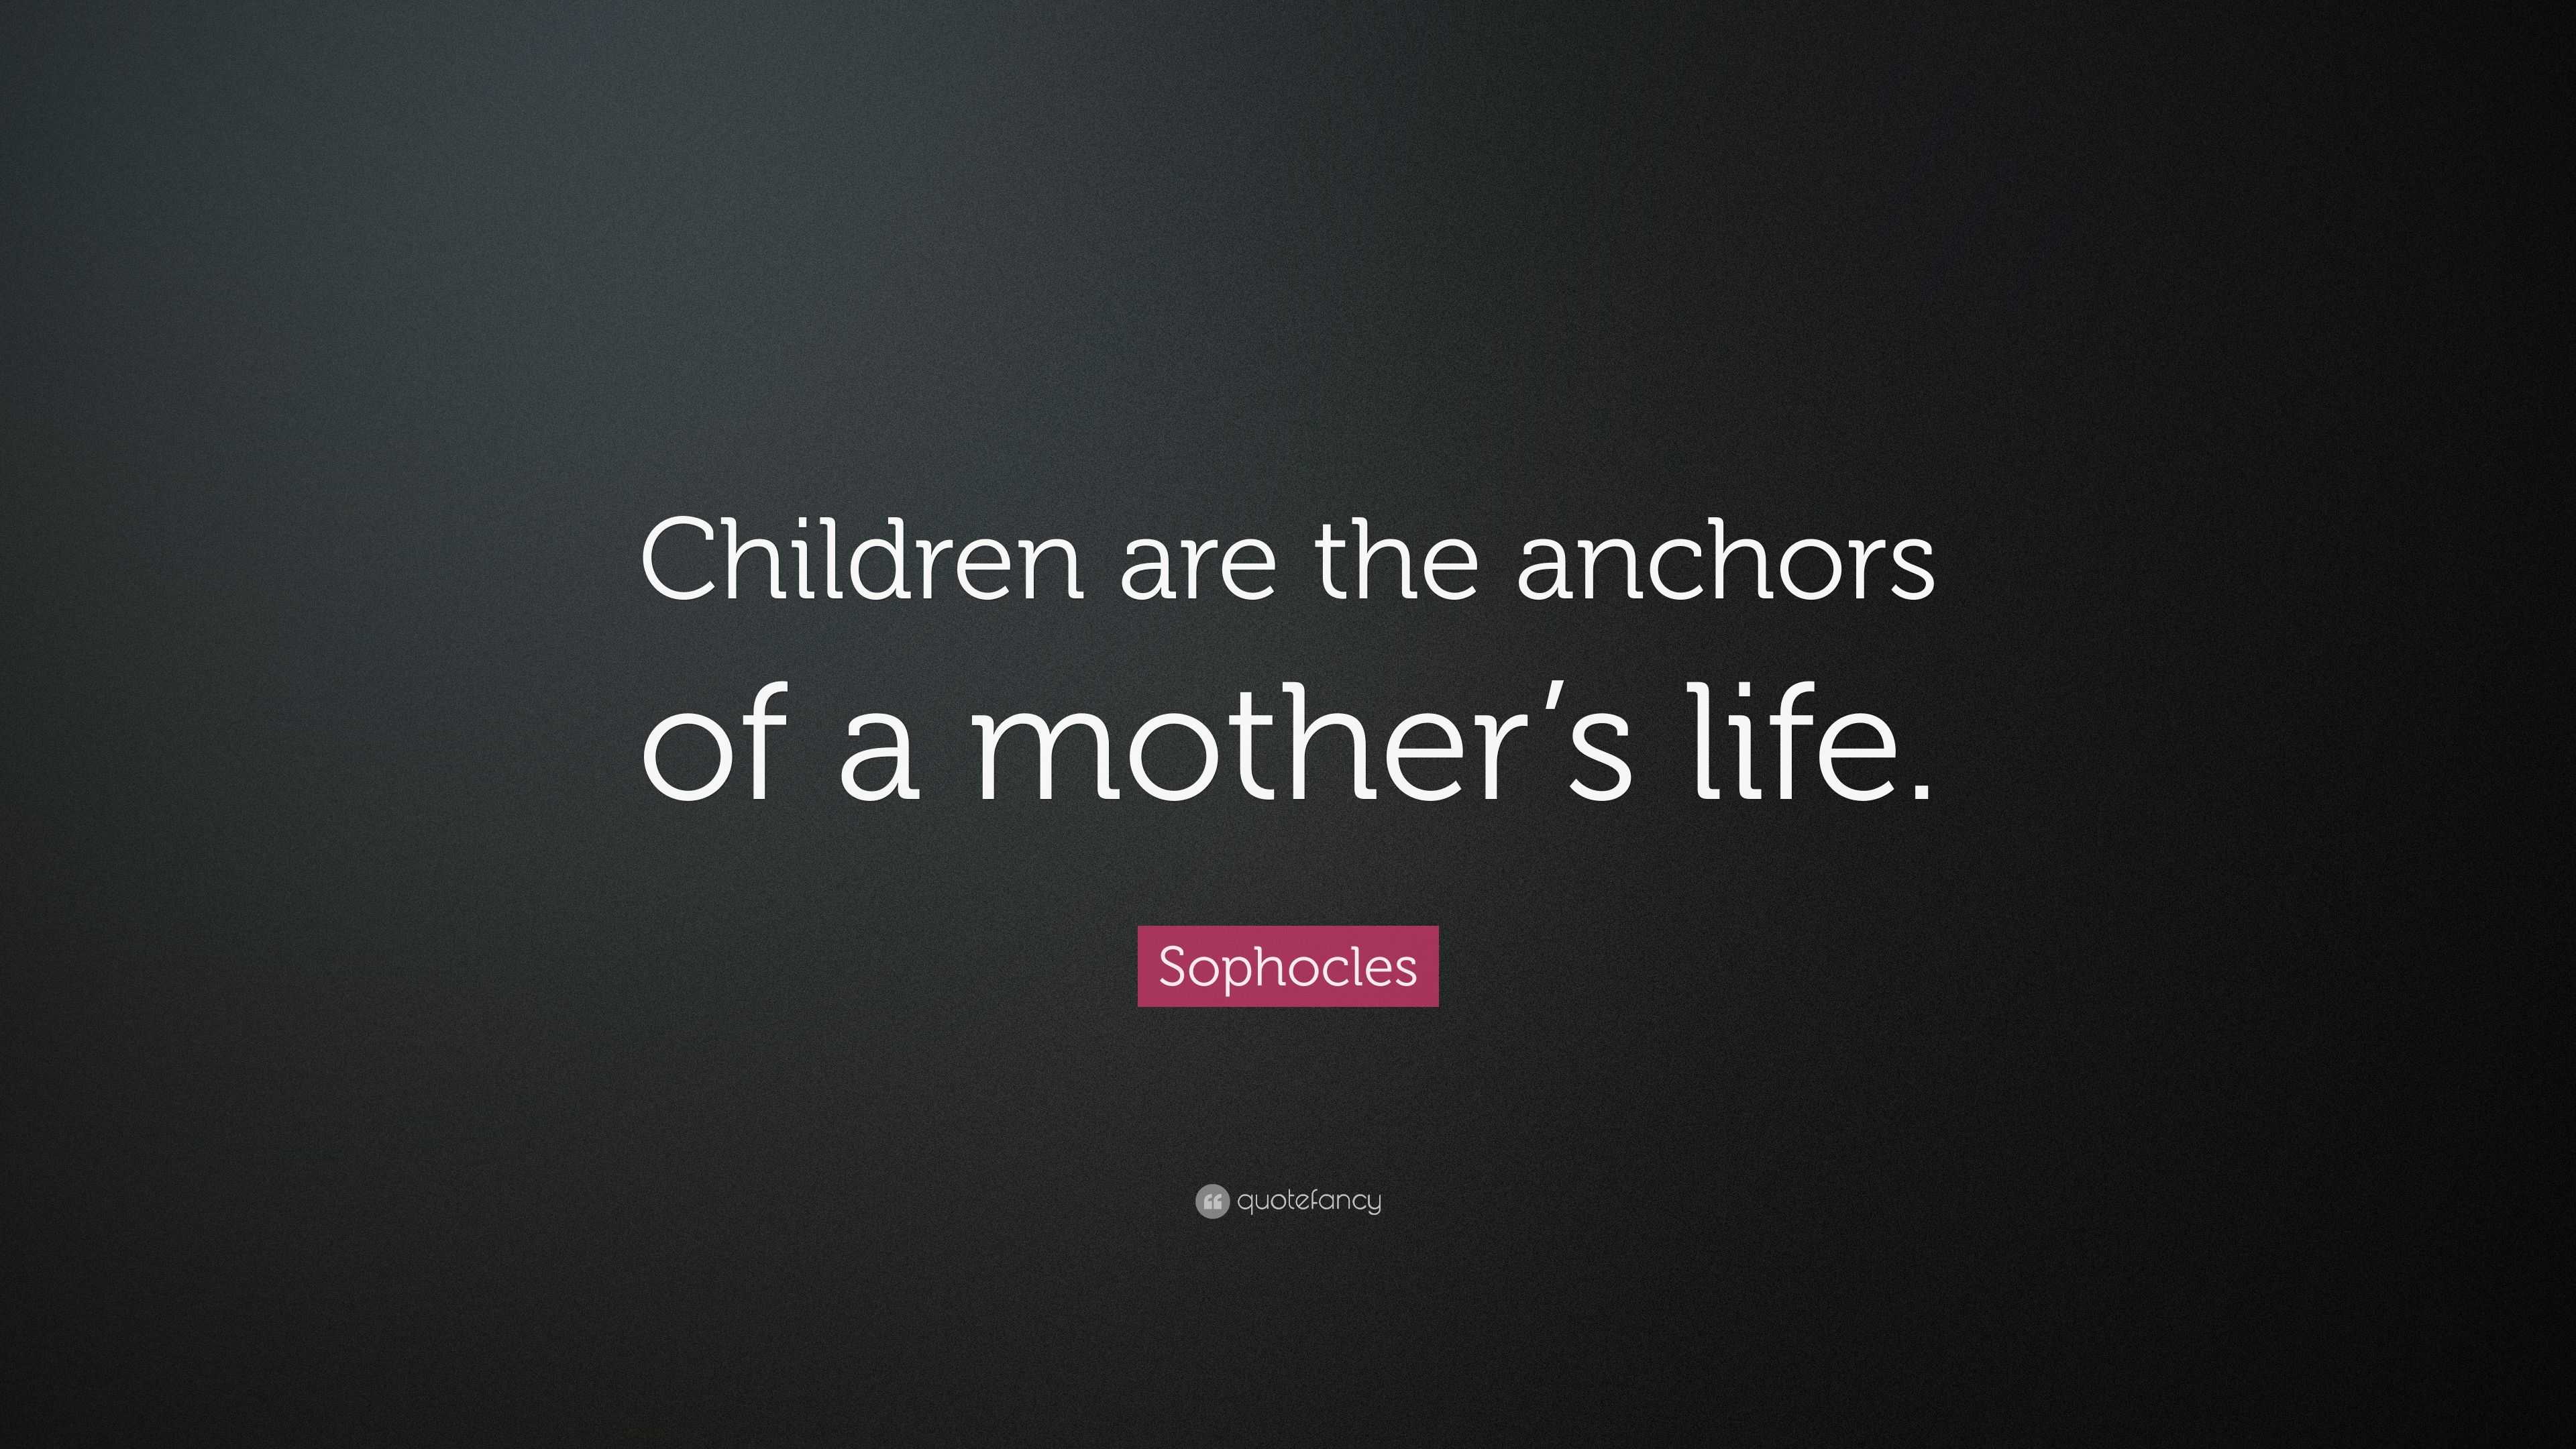 Sophocles Quote: “Children are the anchors of a mother’s life.”